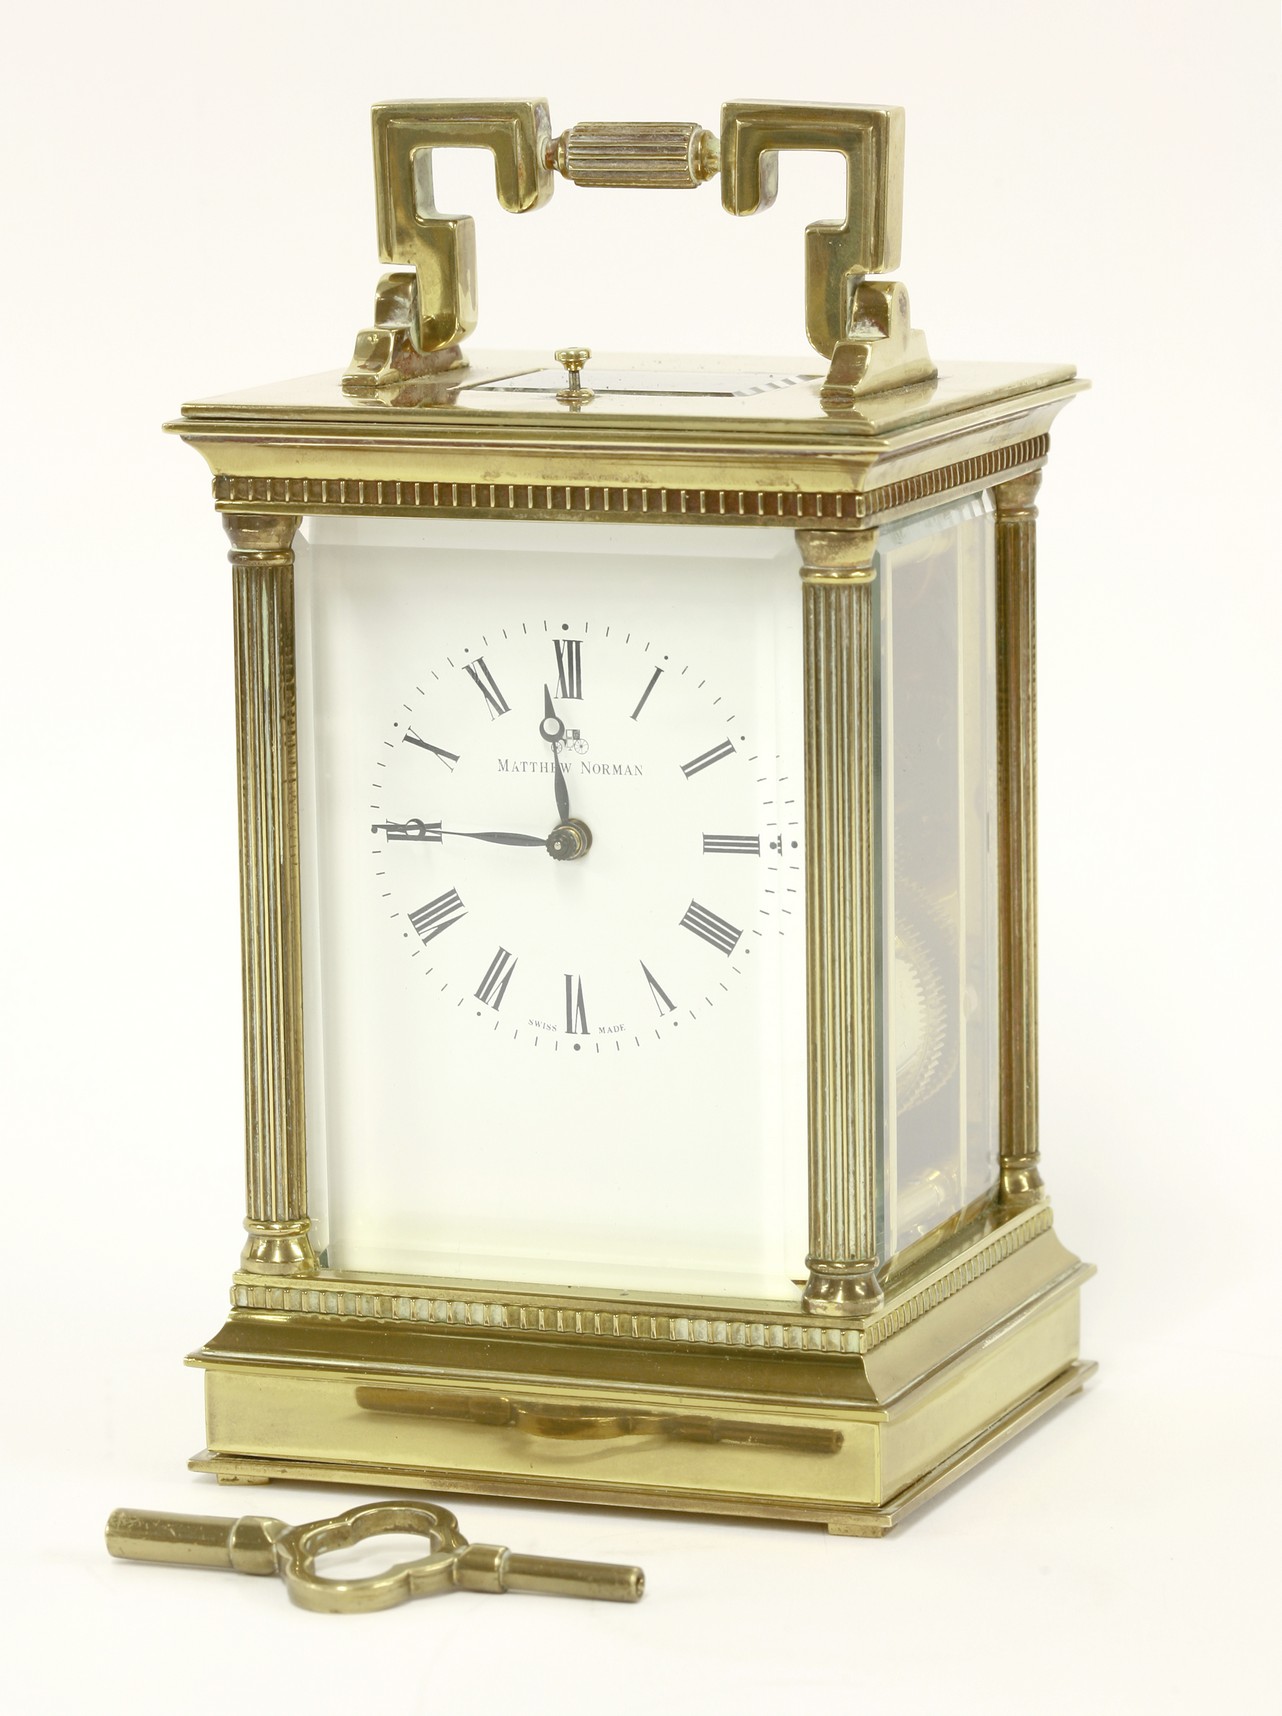 A brass four glass carriage clock, by Matthew Norman, the eight day Swiss movement with repeater